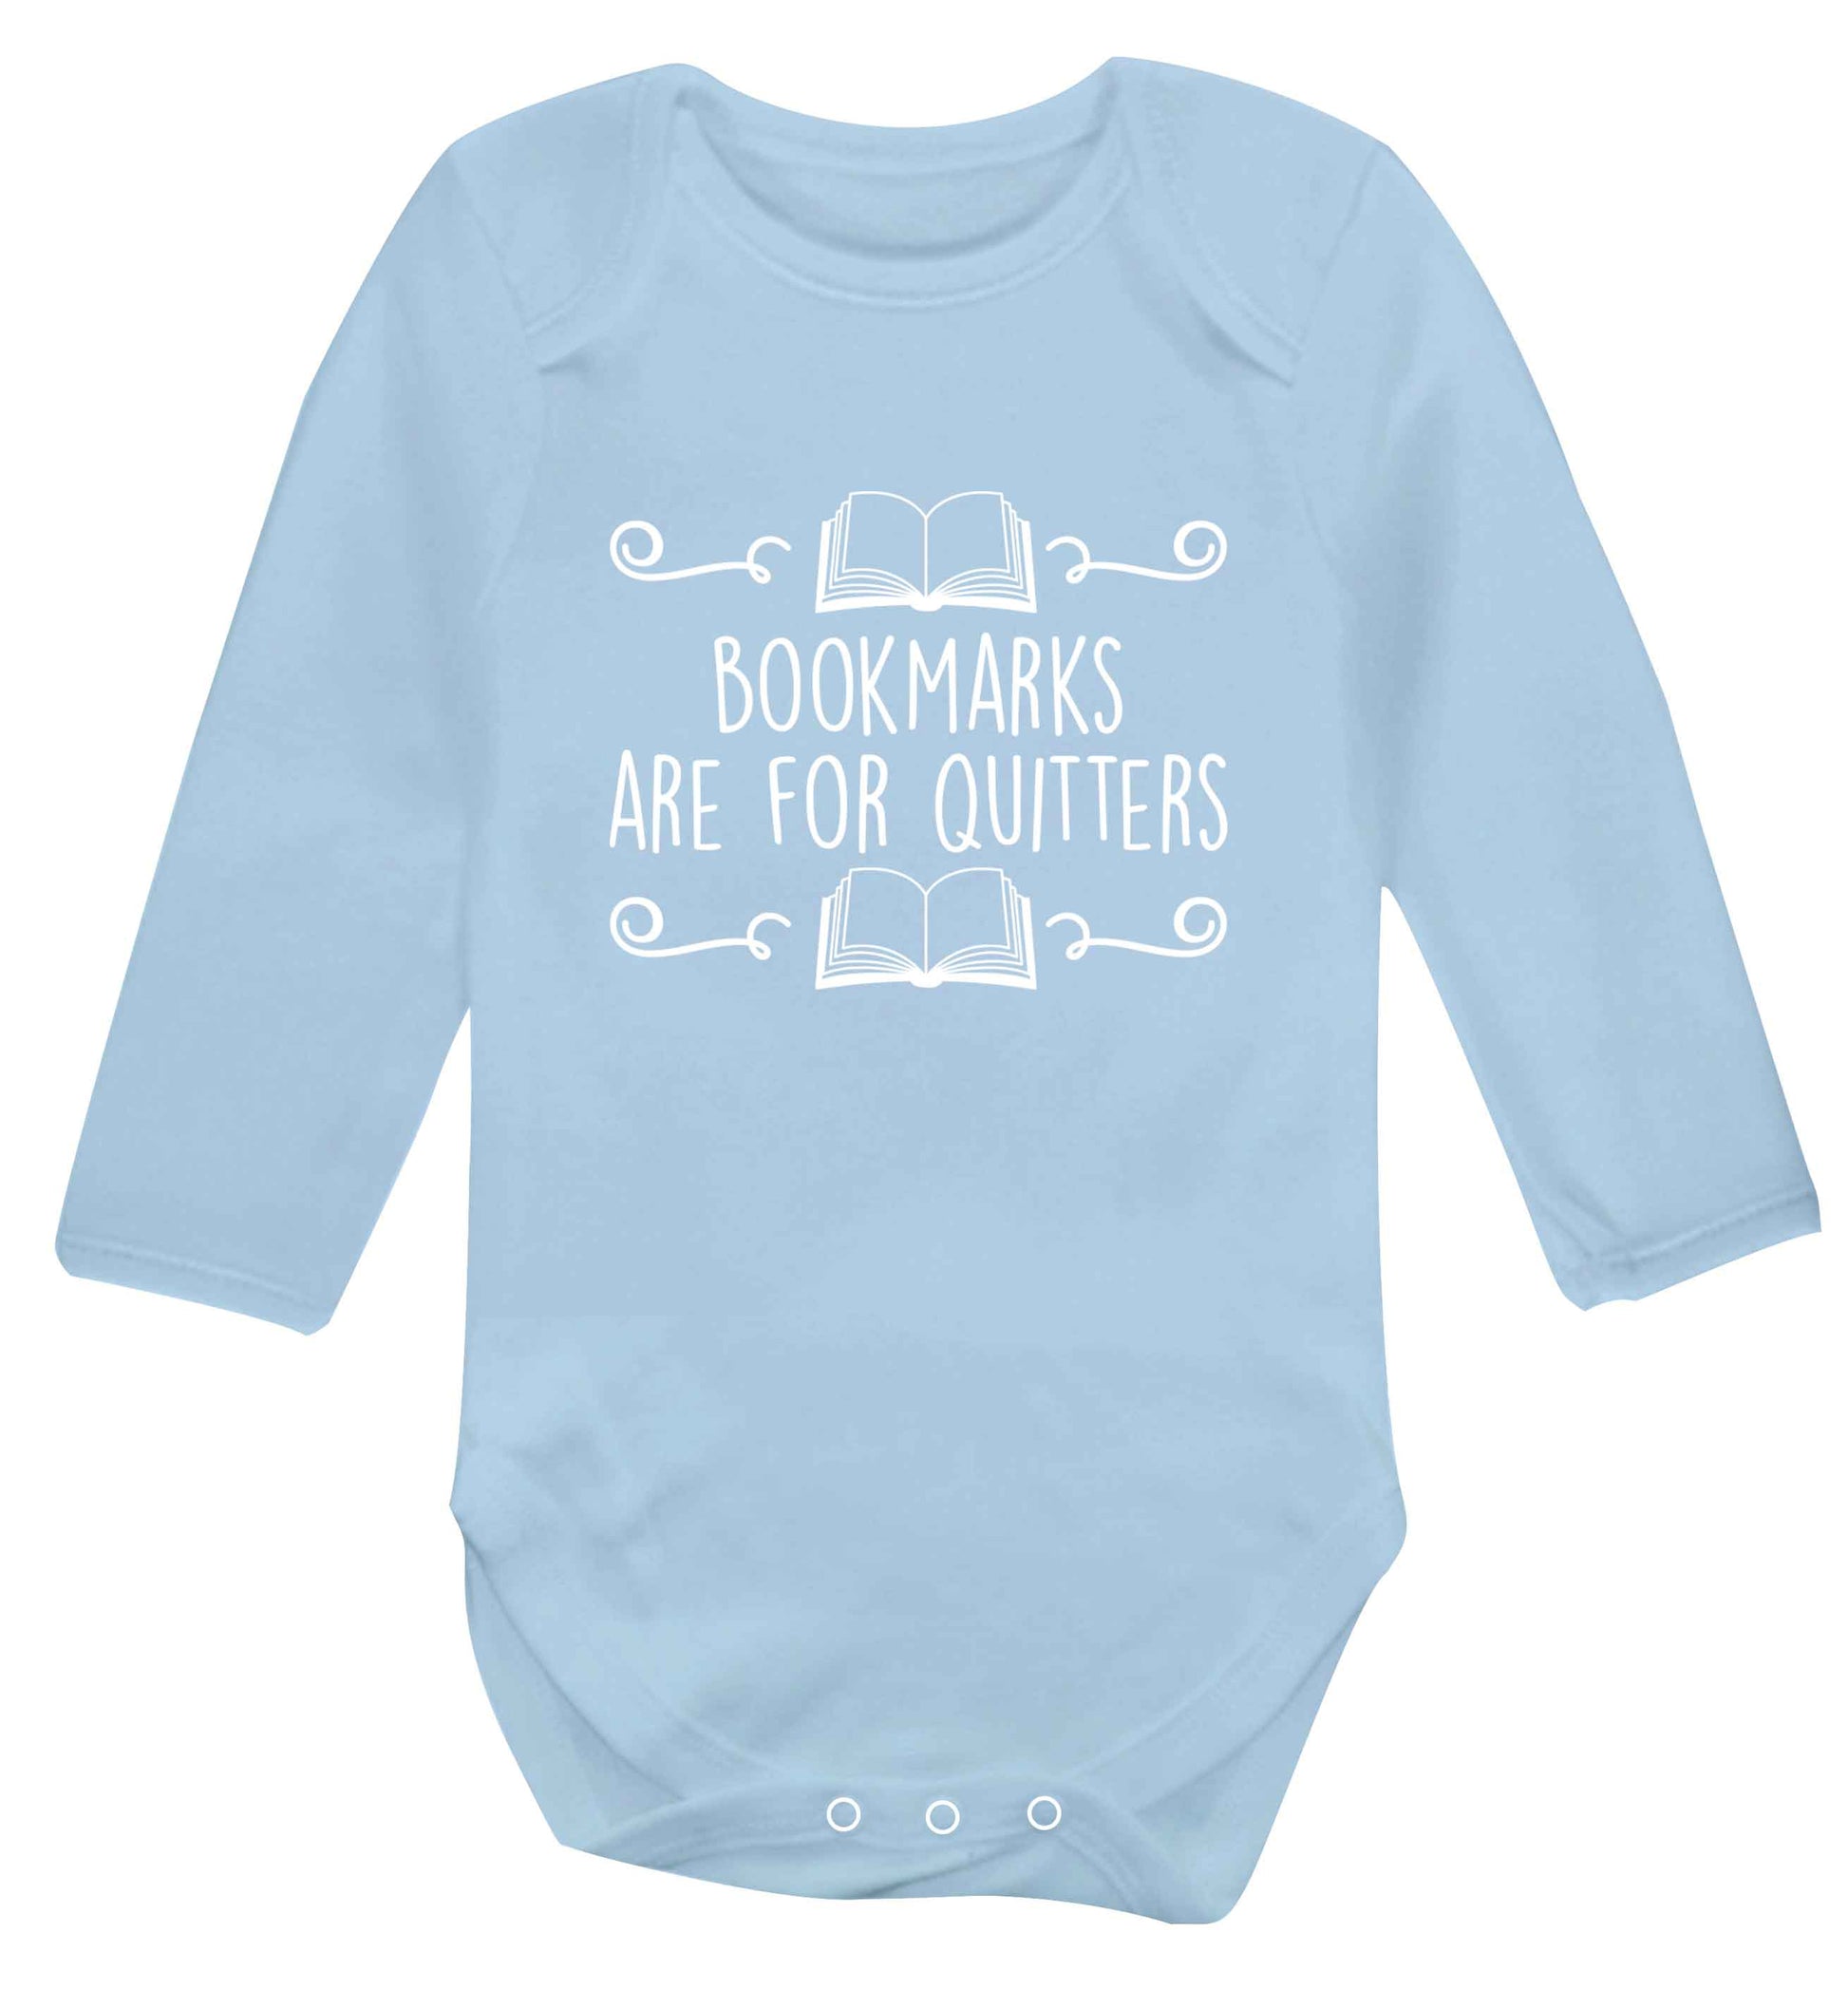 Bookmarks are for quitters baby vest long sleeved pale blue 6-12 months